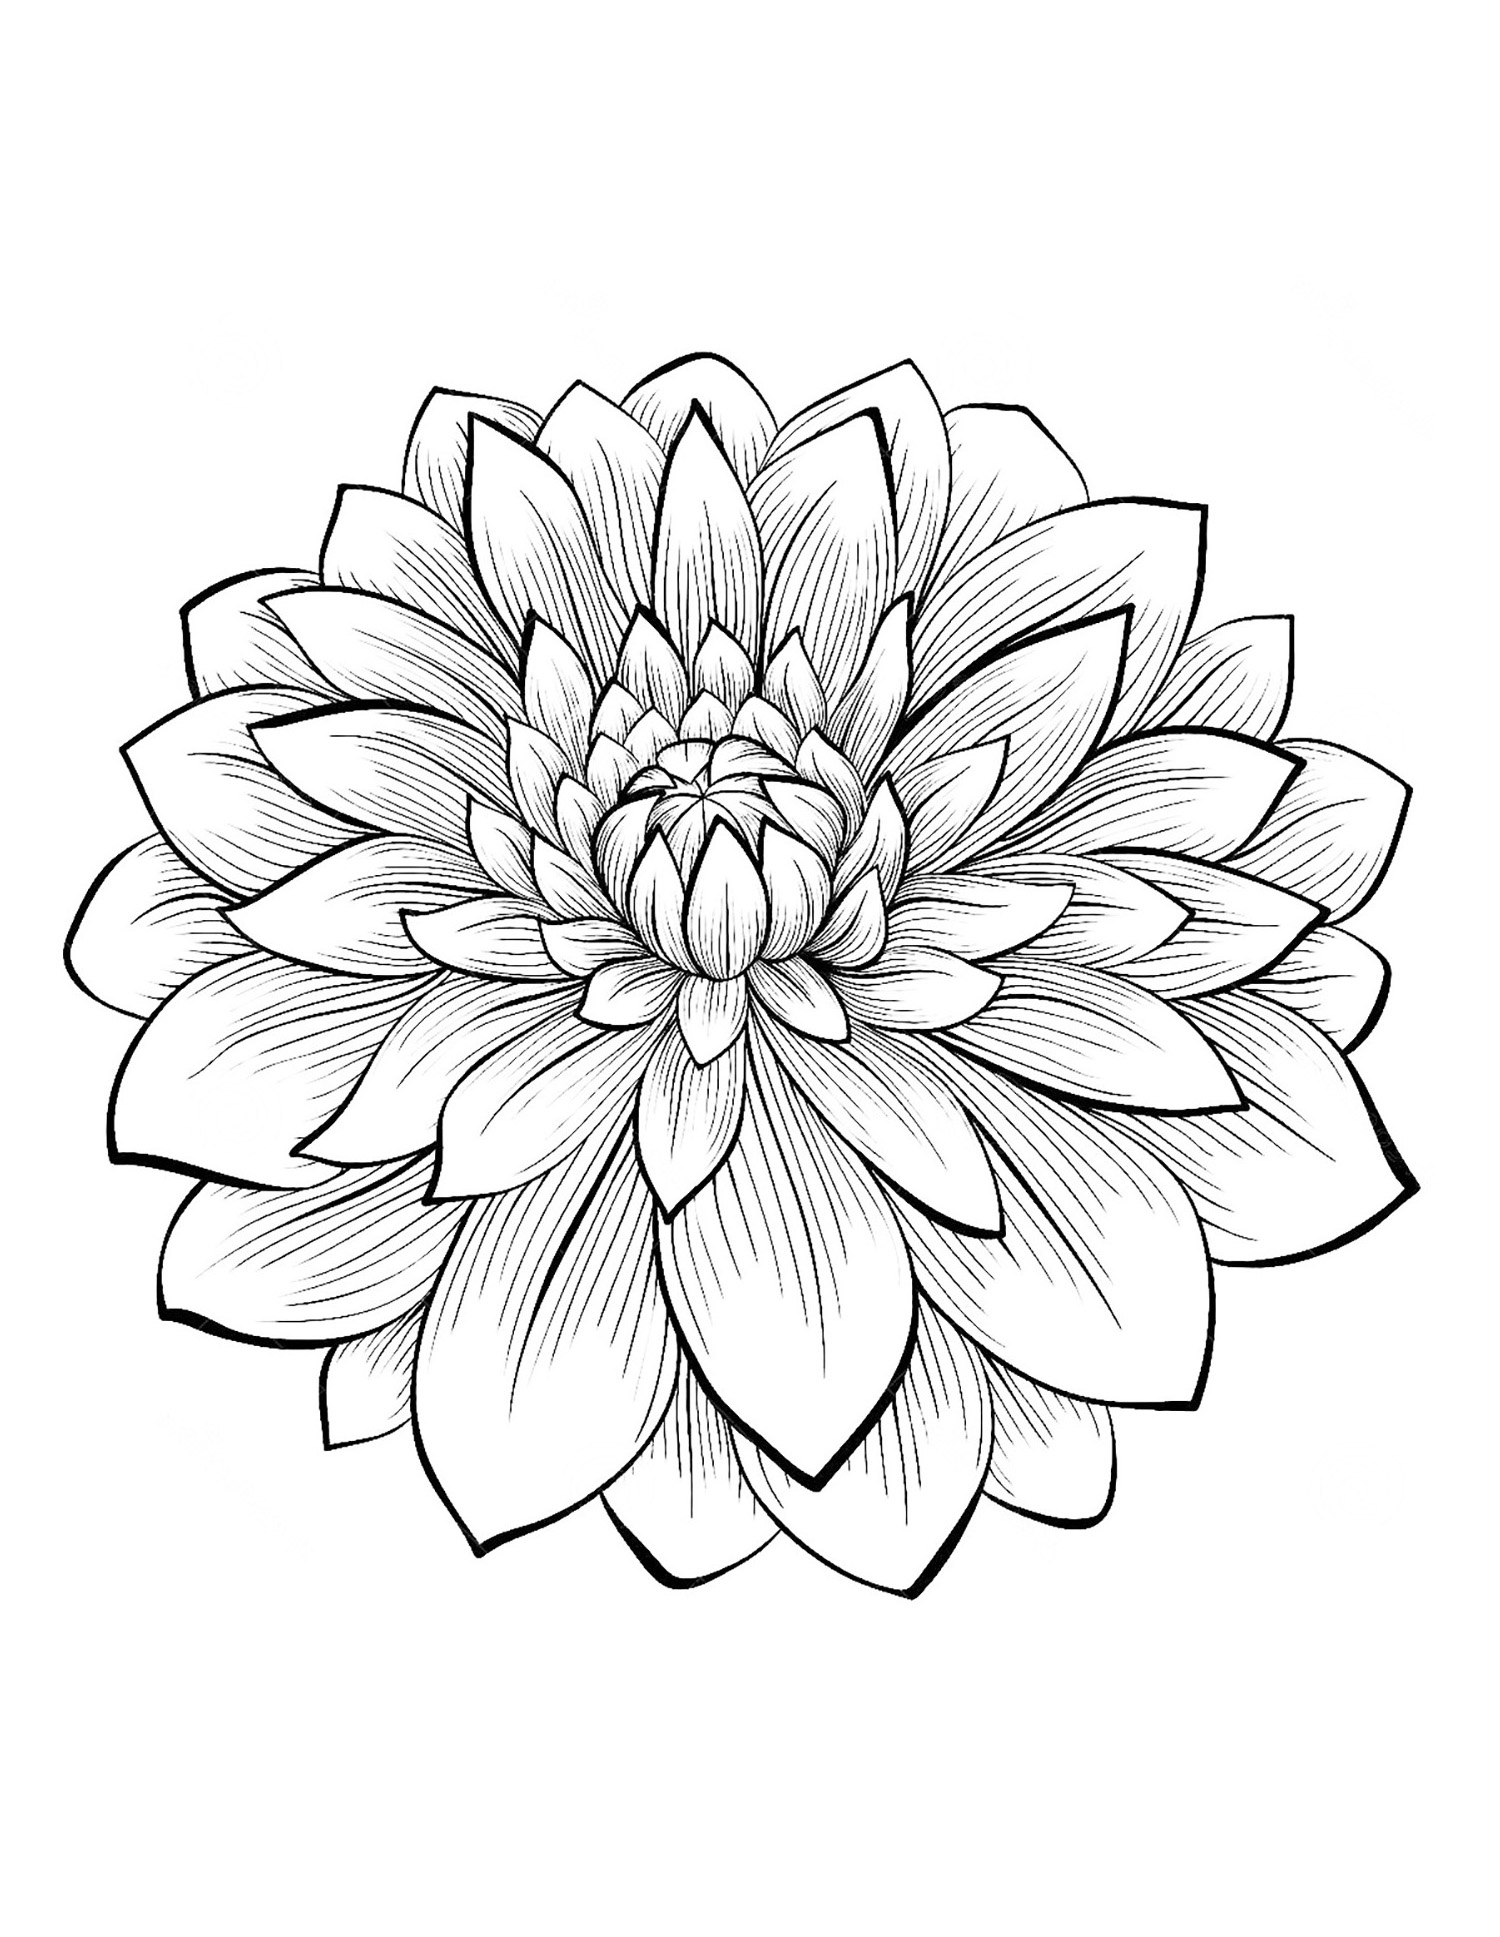 Dahlia - Flowers Kids Coloring Pages